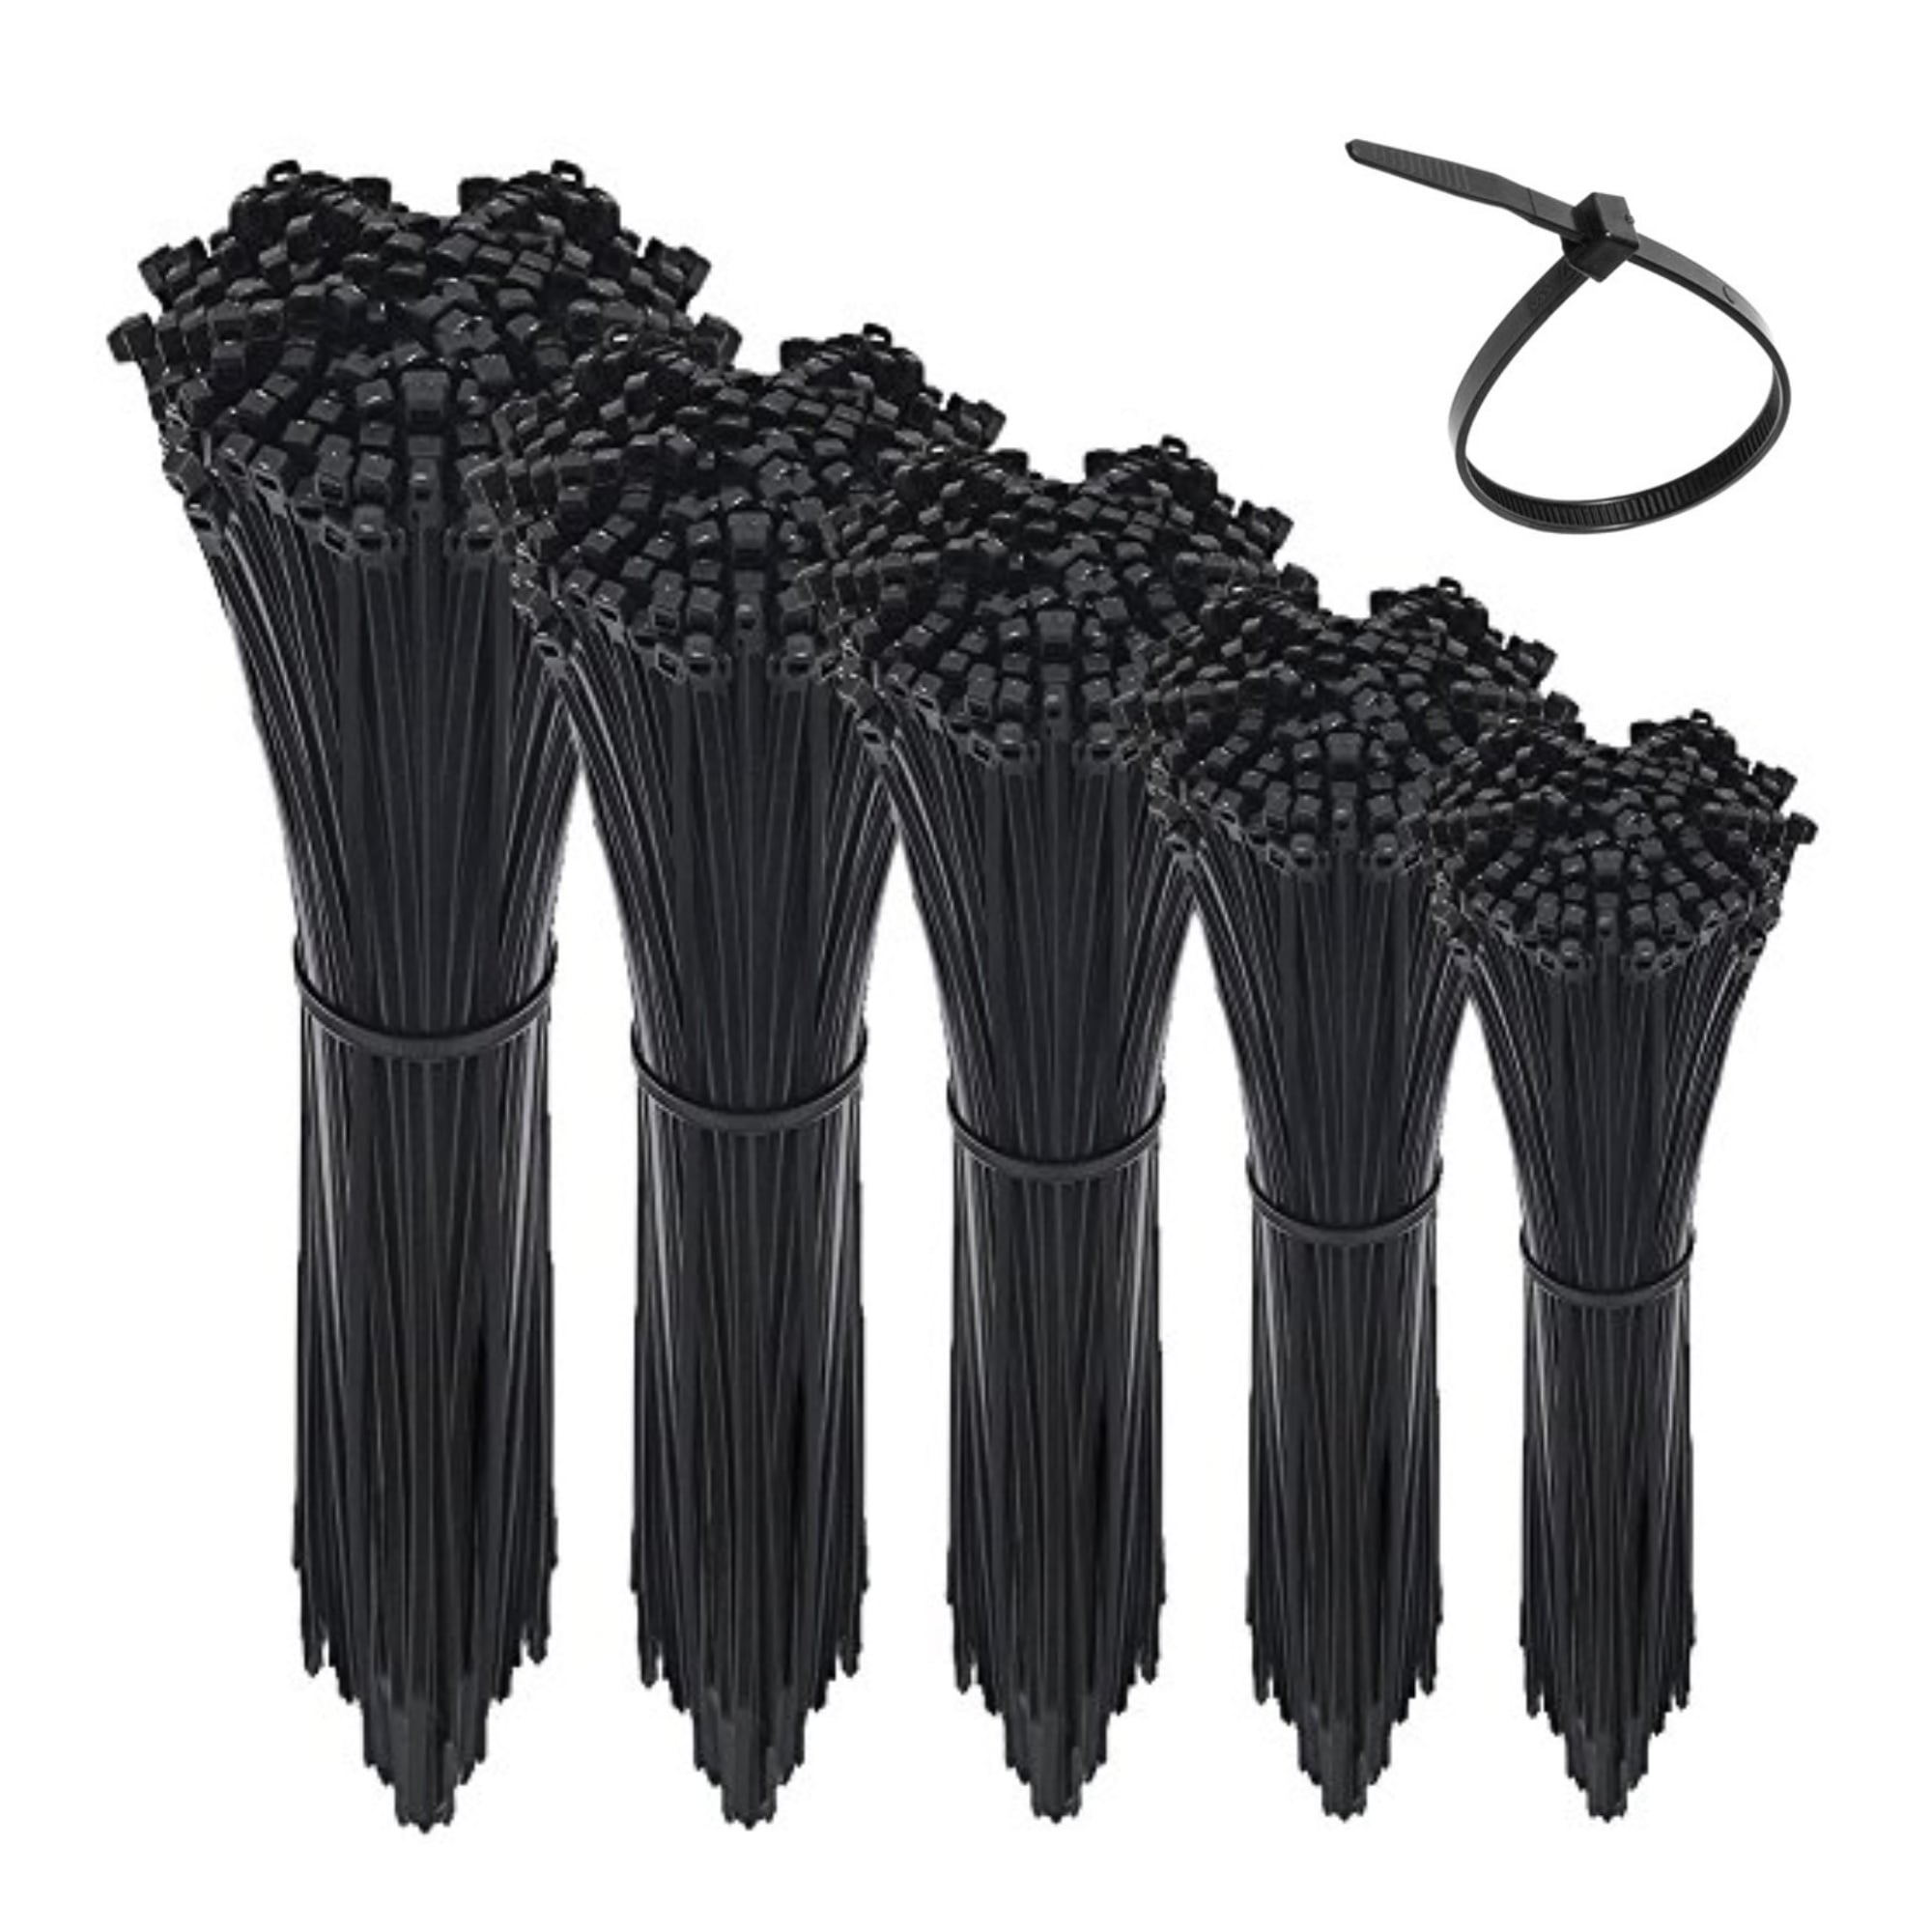 Cable Ties Black | Pack of 20